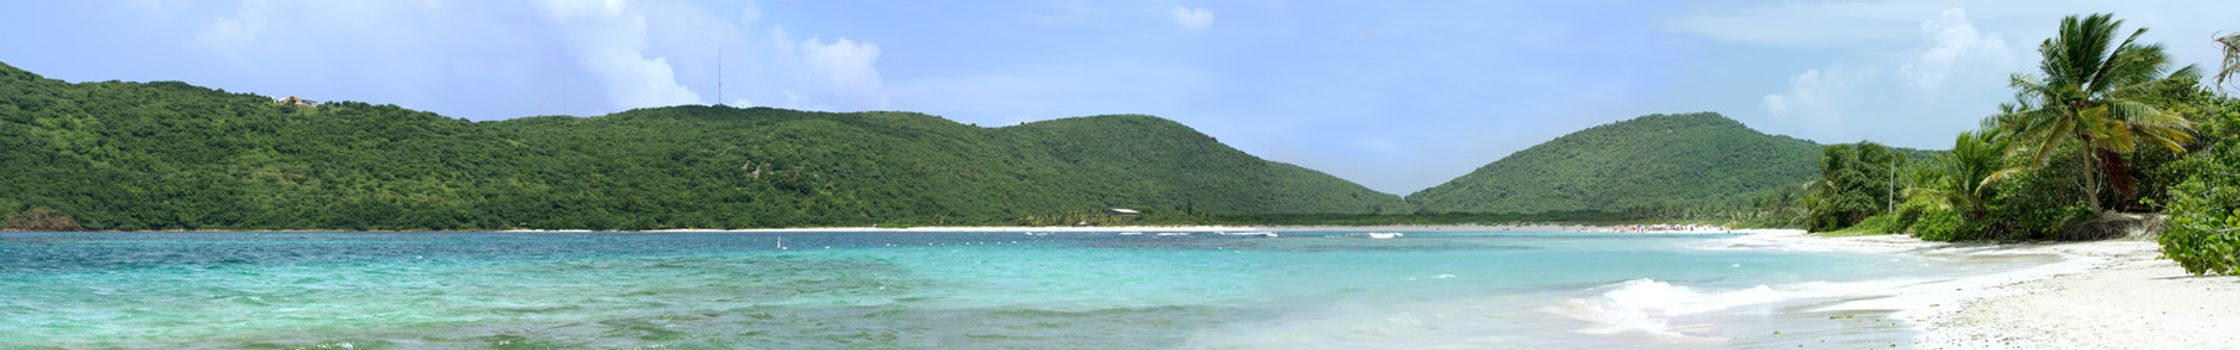 The gorgeous white sand filled Flamenco beach on the Puerto Rican island of Culebra.